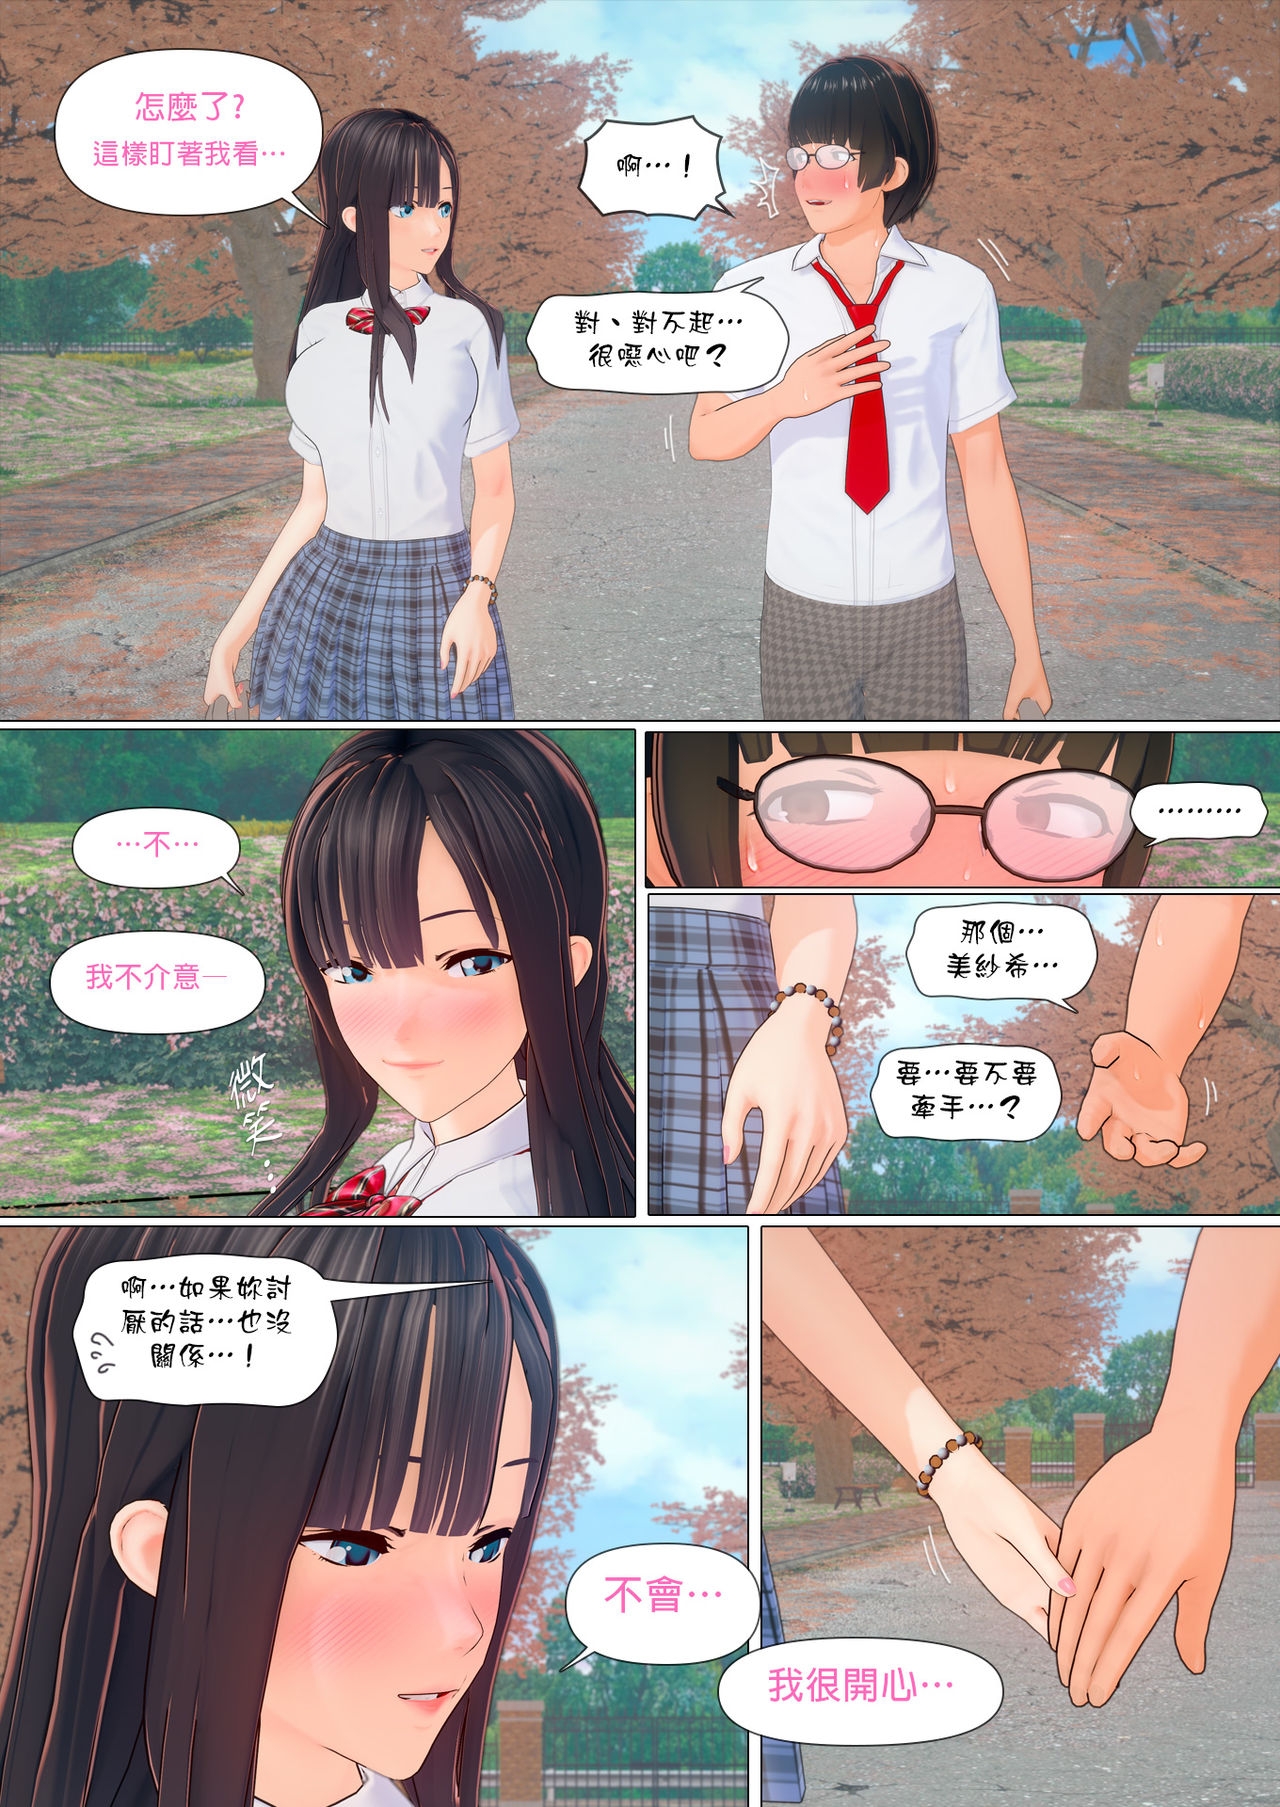 [Nameless Peasant] Promise 4 (Sample) [Chinese] 2